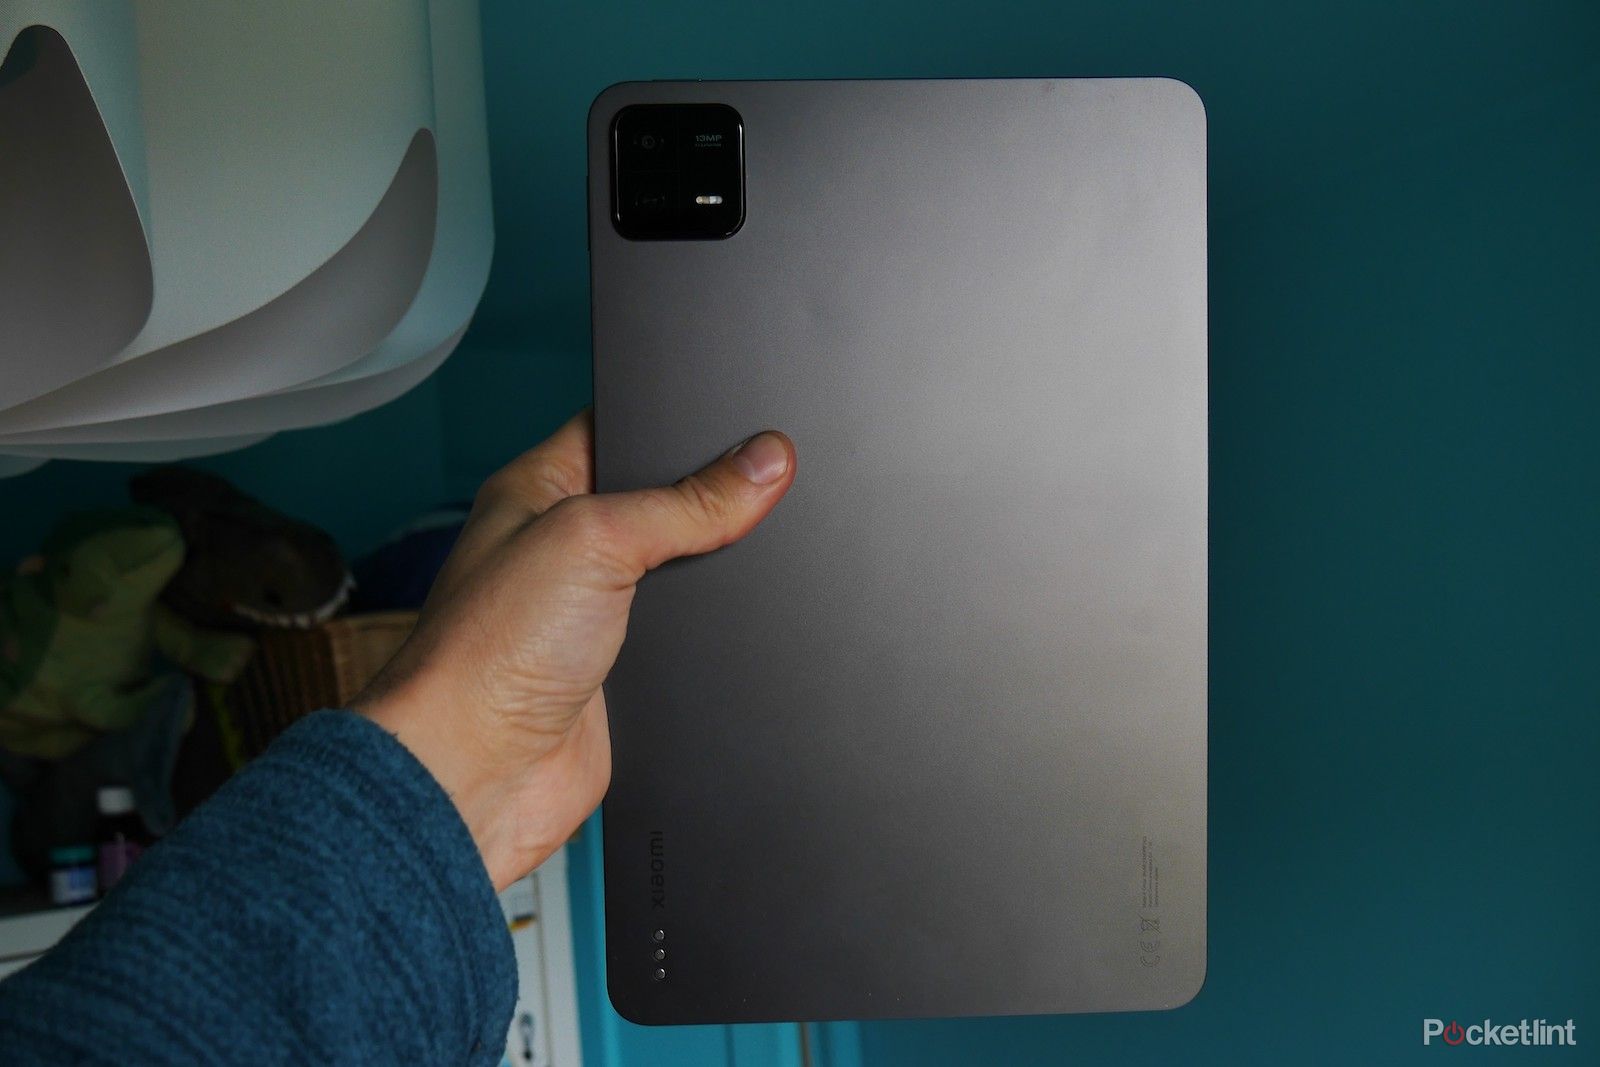 Xiaomi Pad 6 (artist review): Great tablet but pen has line quality issues  